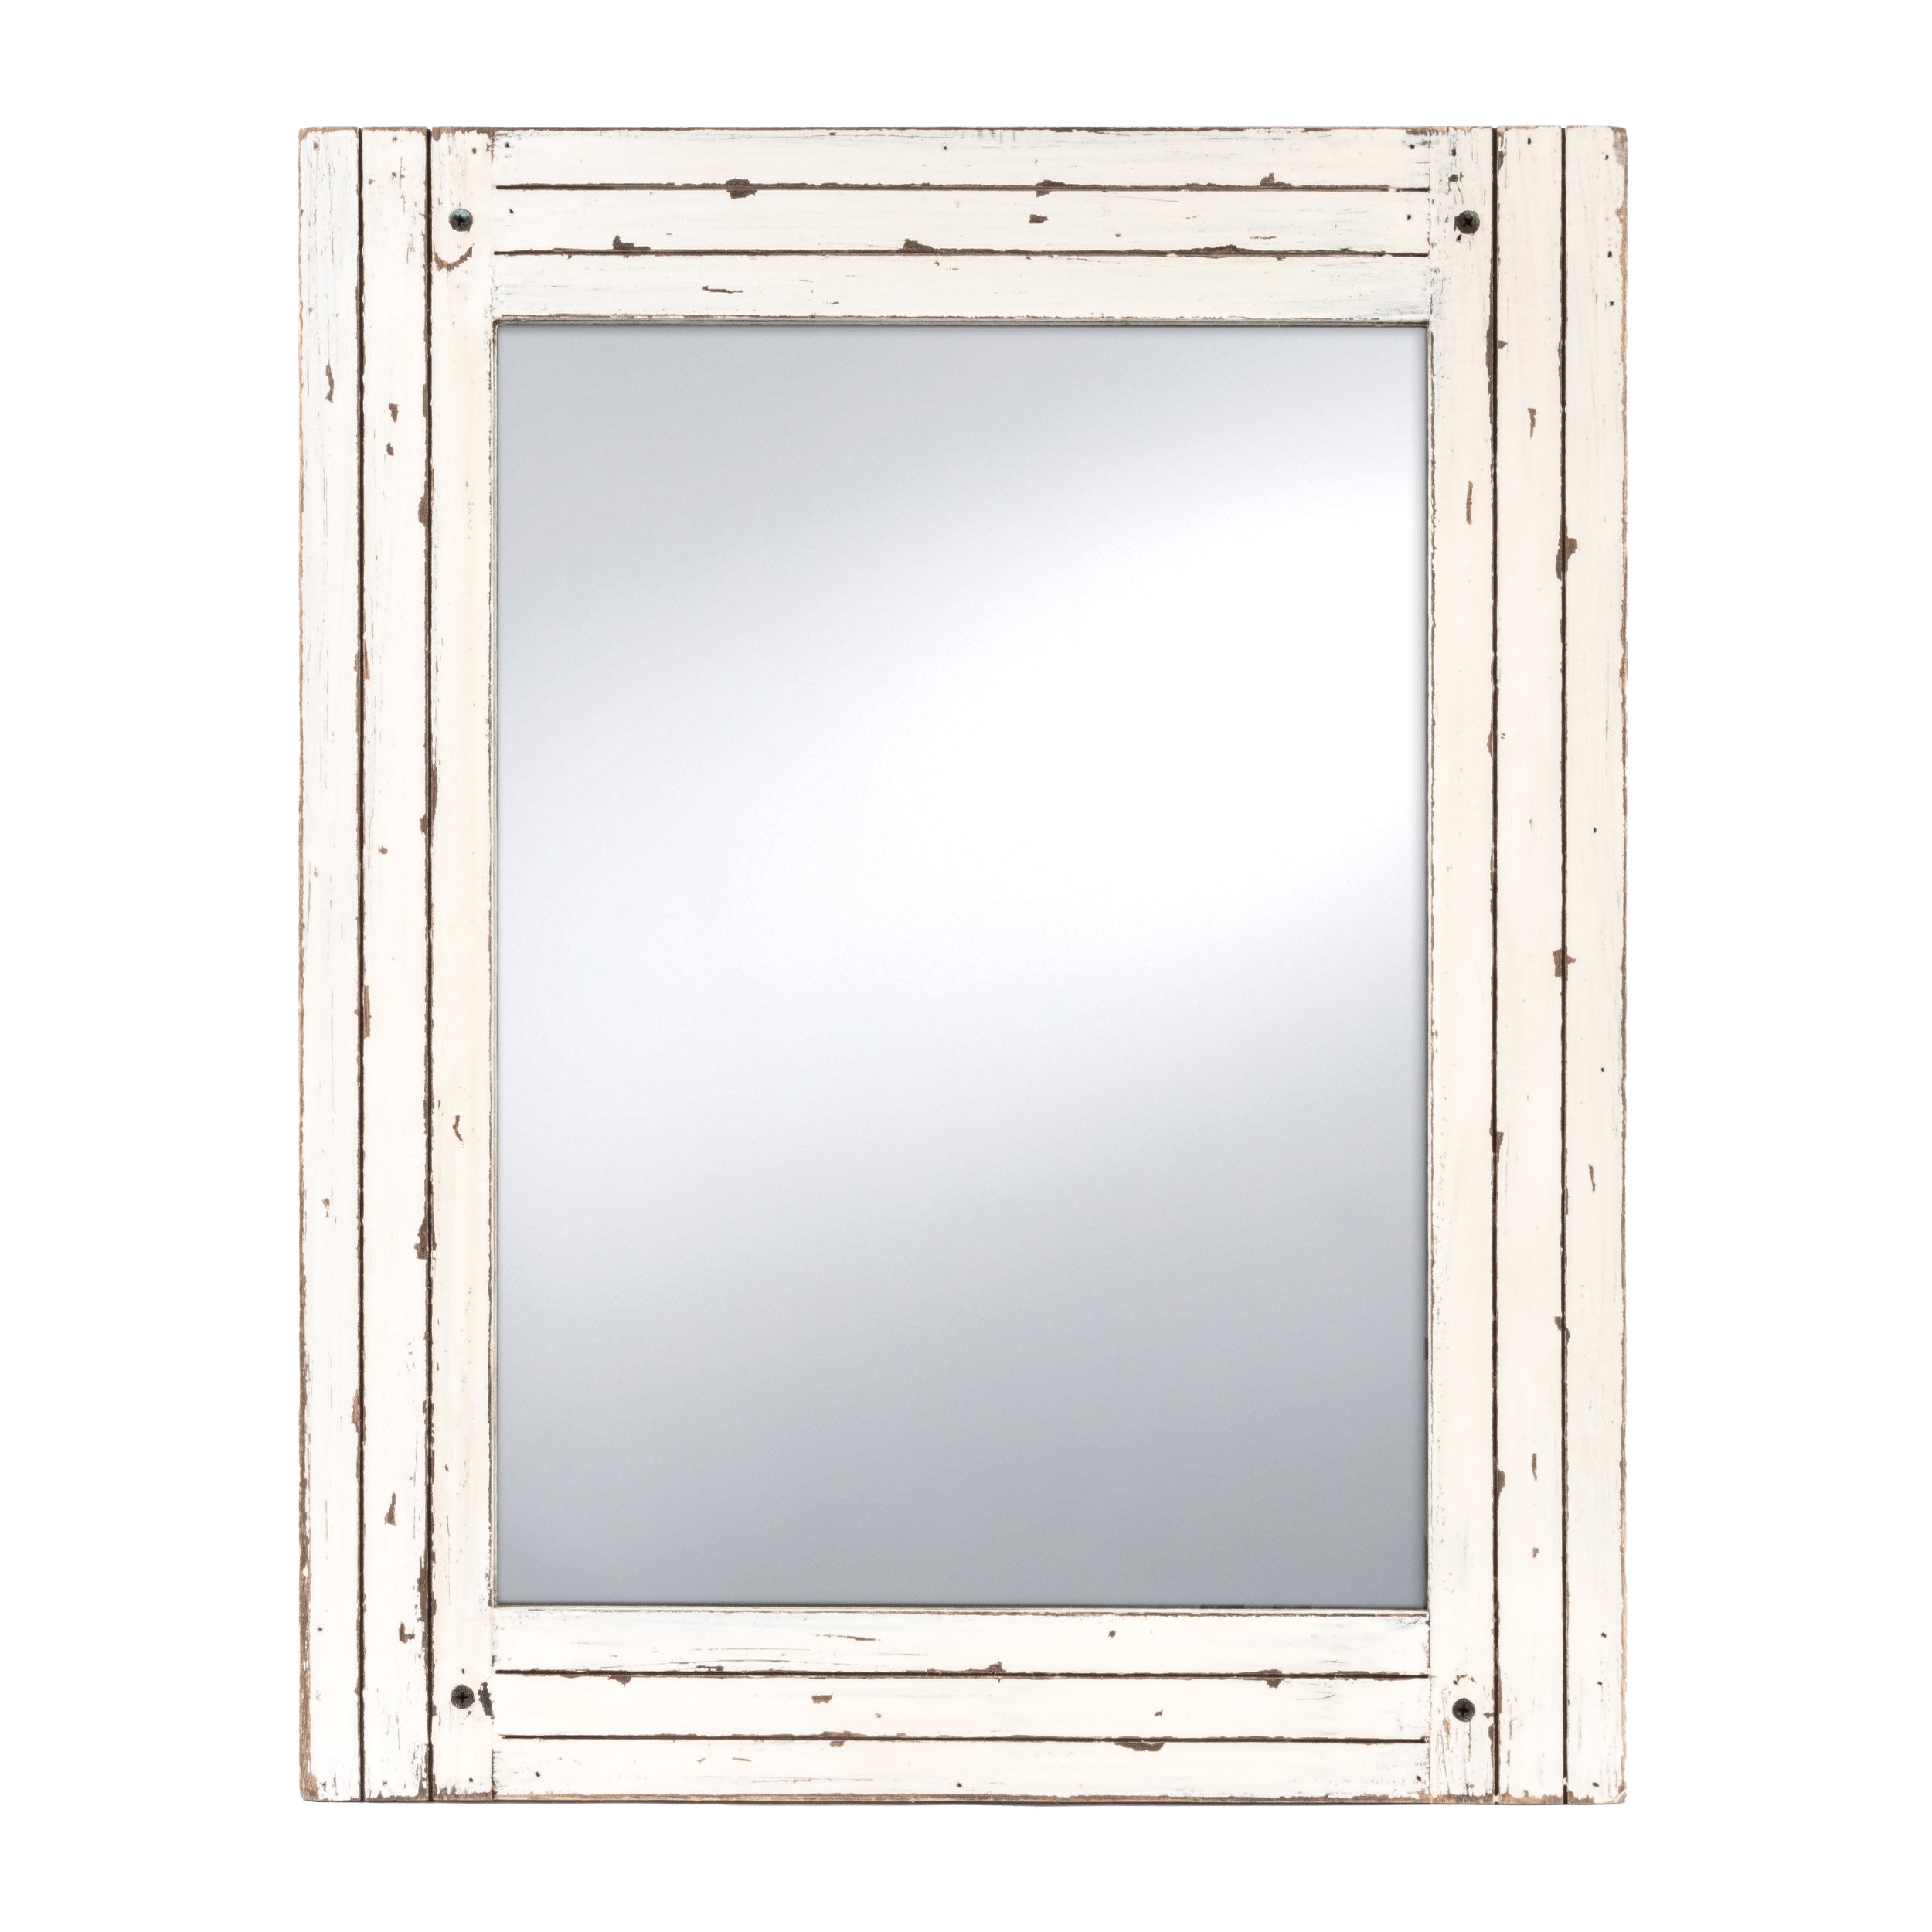 Homestead 18.5-Inch by 23.5-Inch Distressed Wood Mirror, Antique White